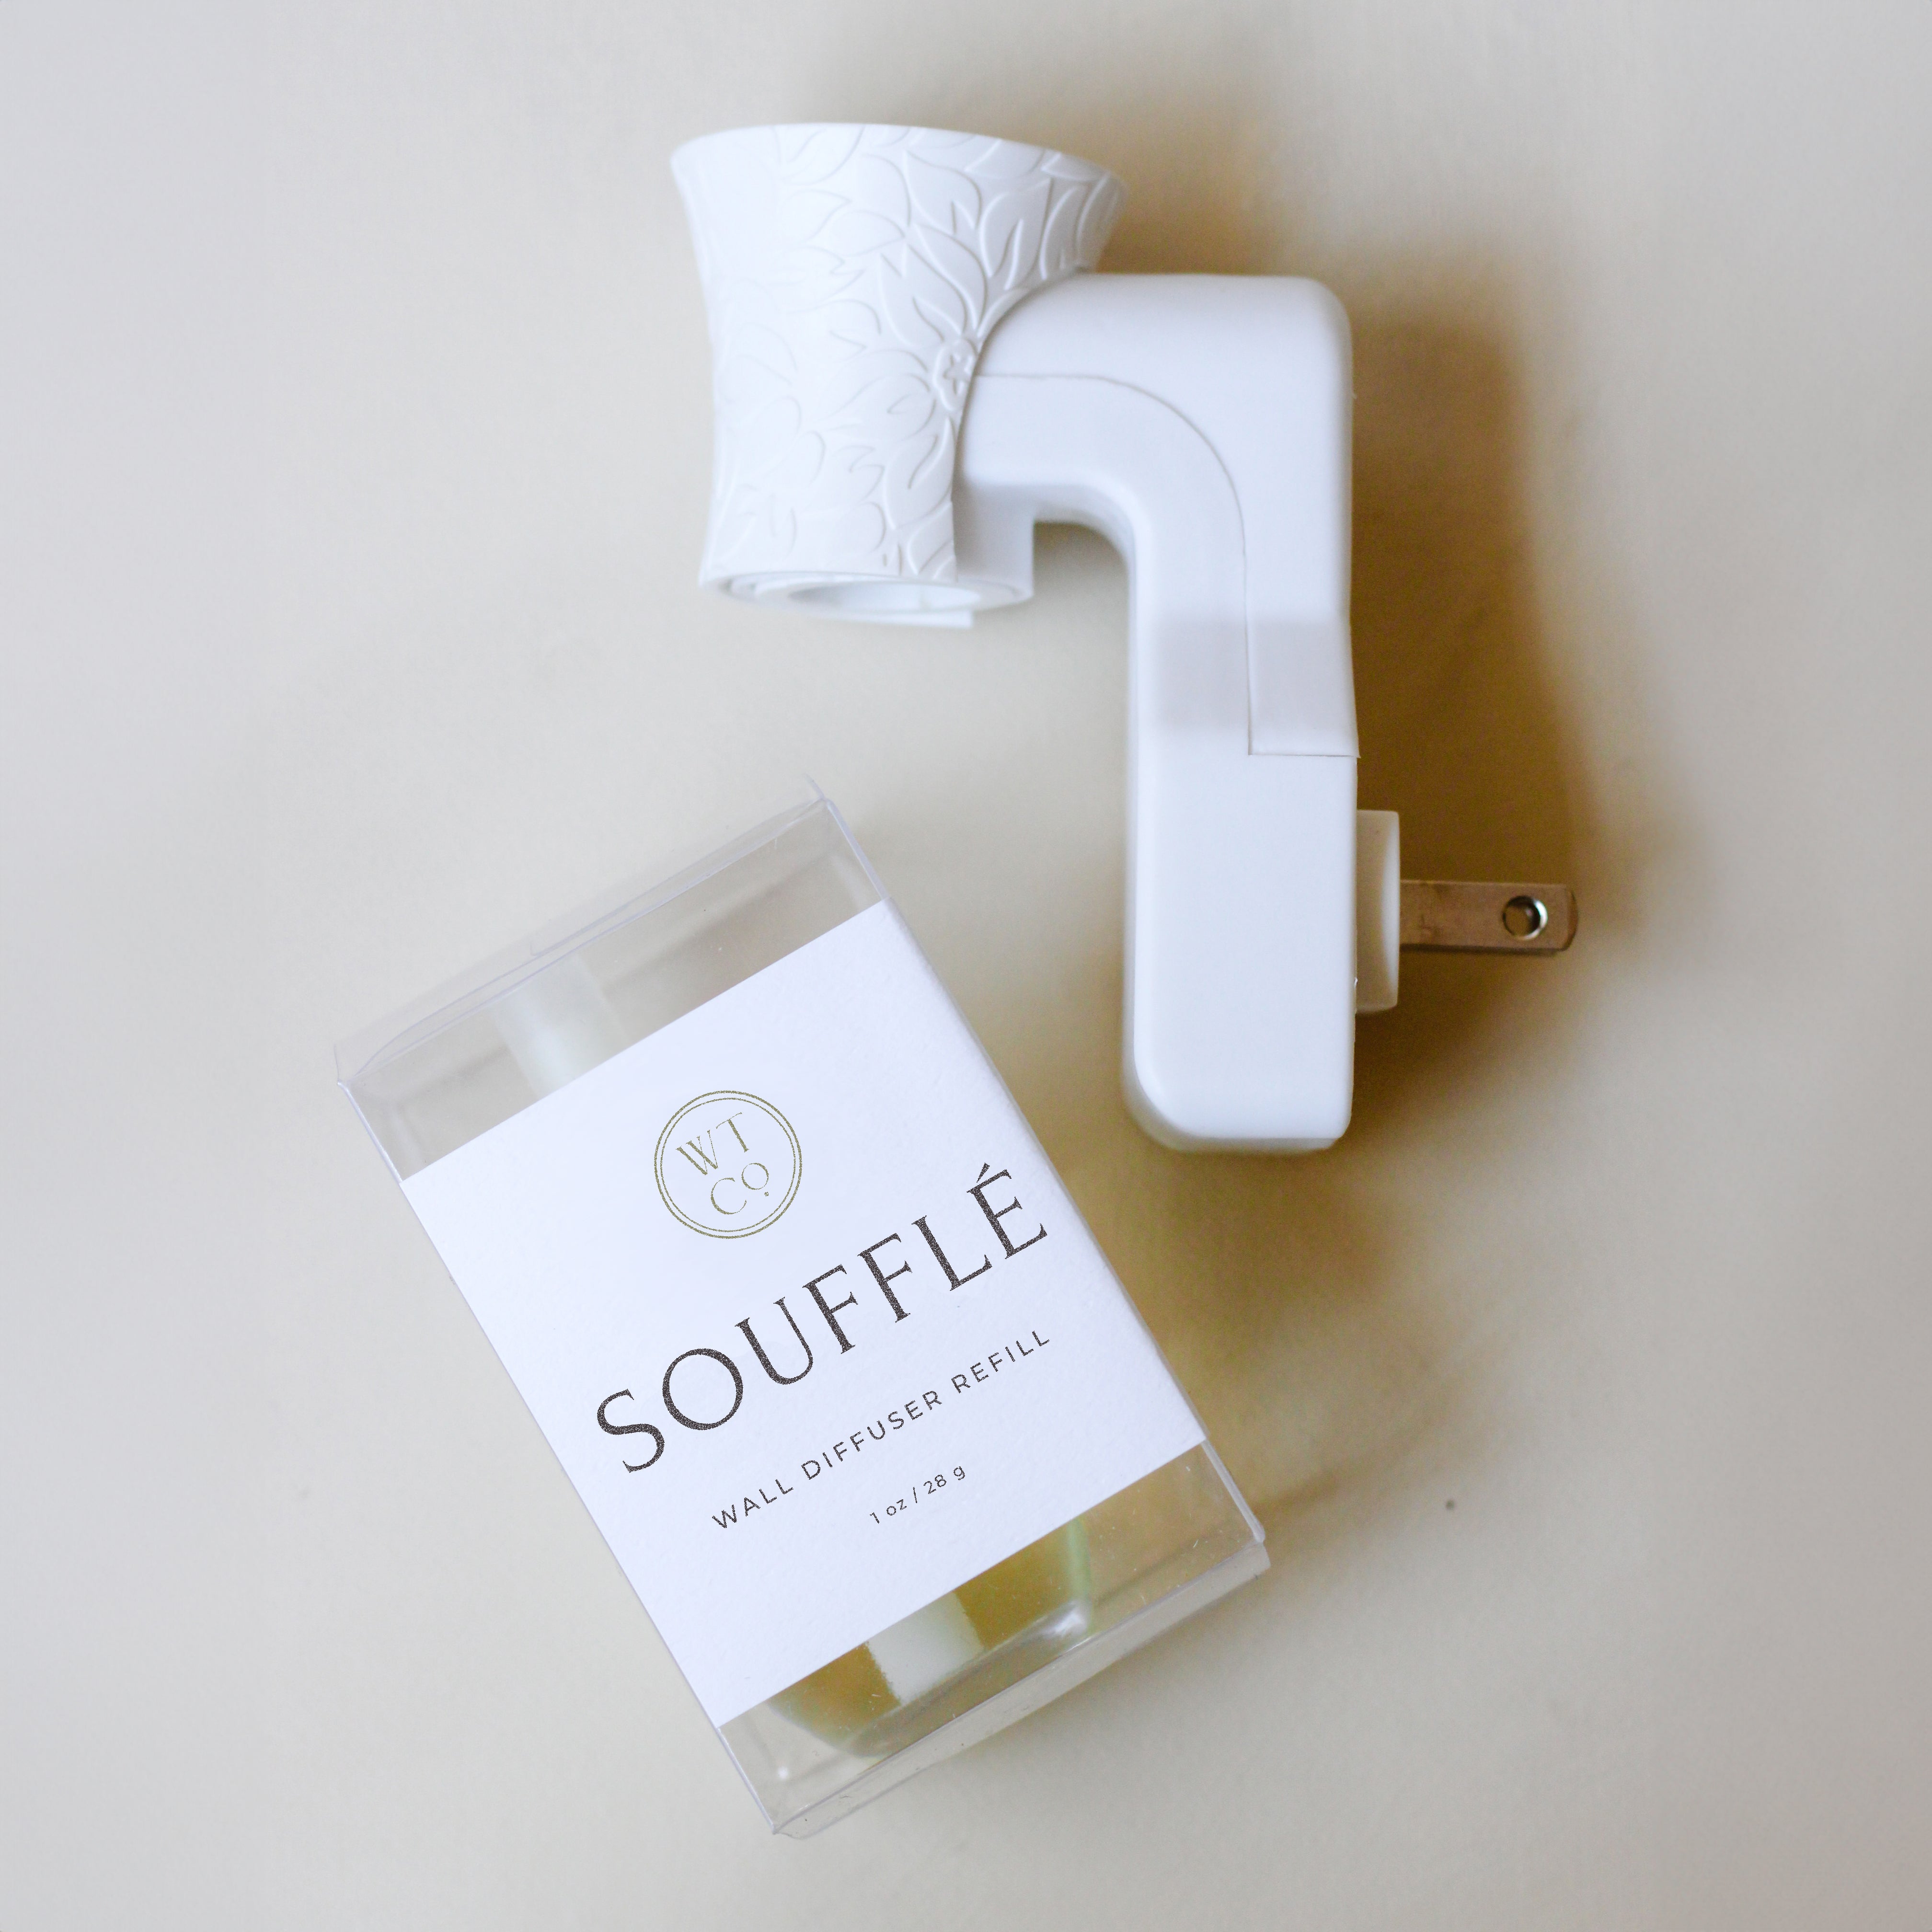 Soufflé Wall Diffuser Refill | Well-Taylored Co.